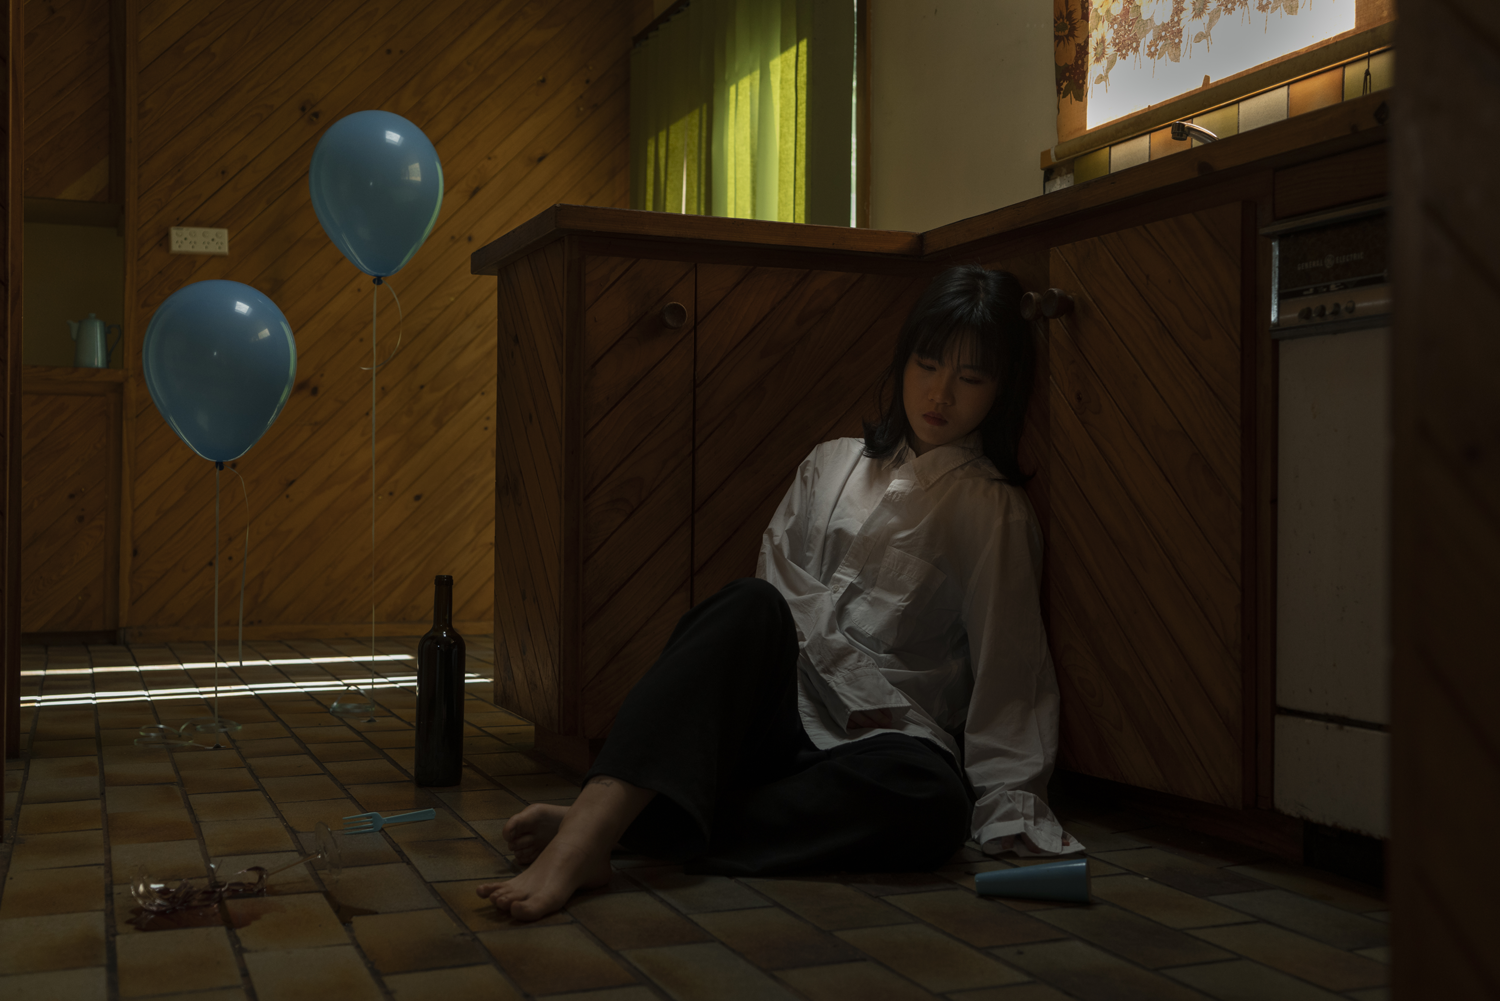 Dark digital image of woman sitting on tiled floor, leaning against a kitchen bench.  A wine bottle and two pale blue balloons sit on the floor beside her.  